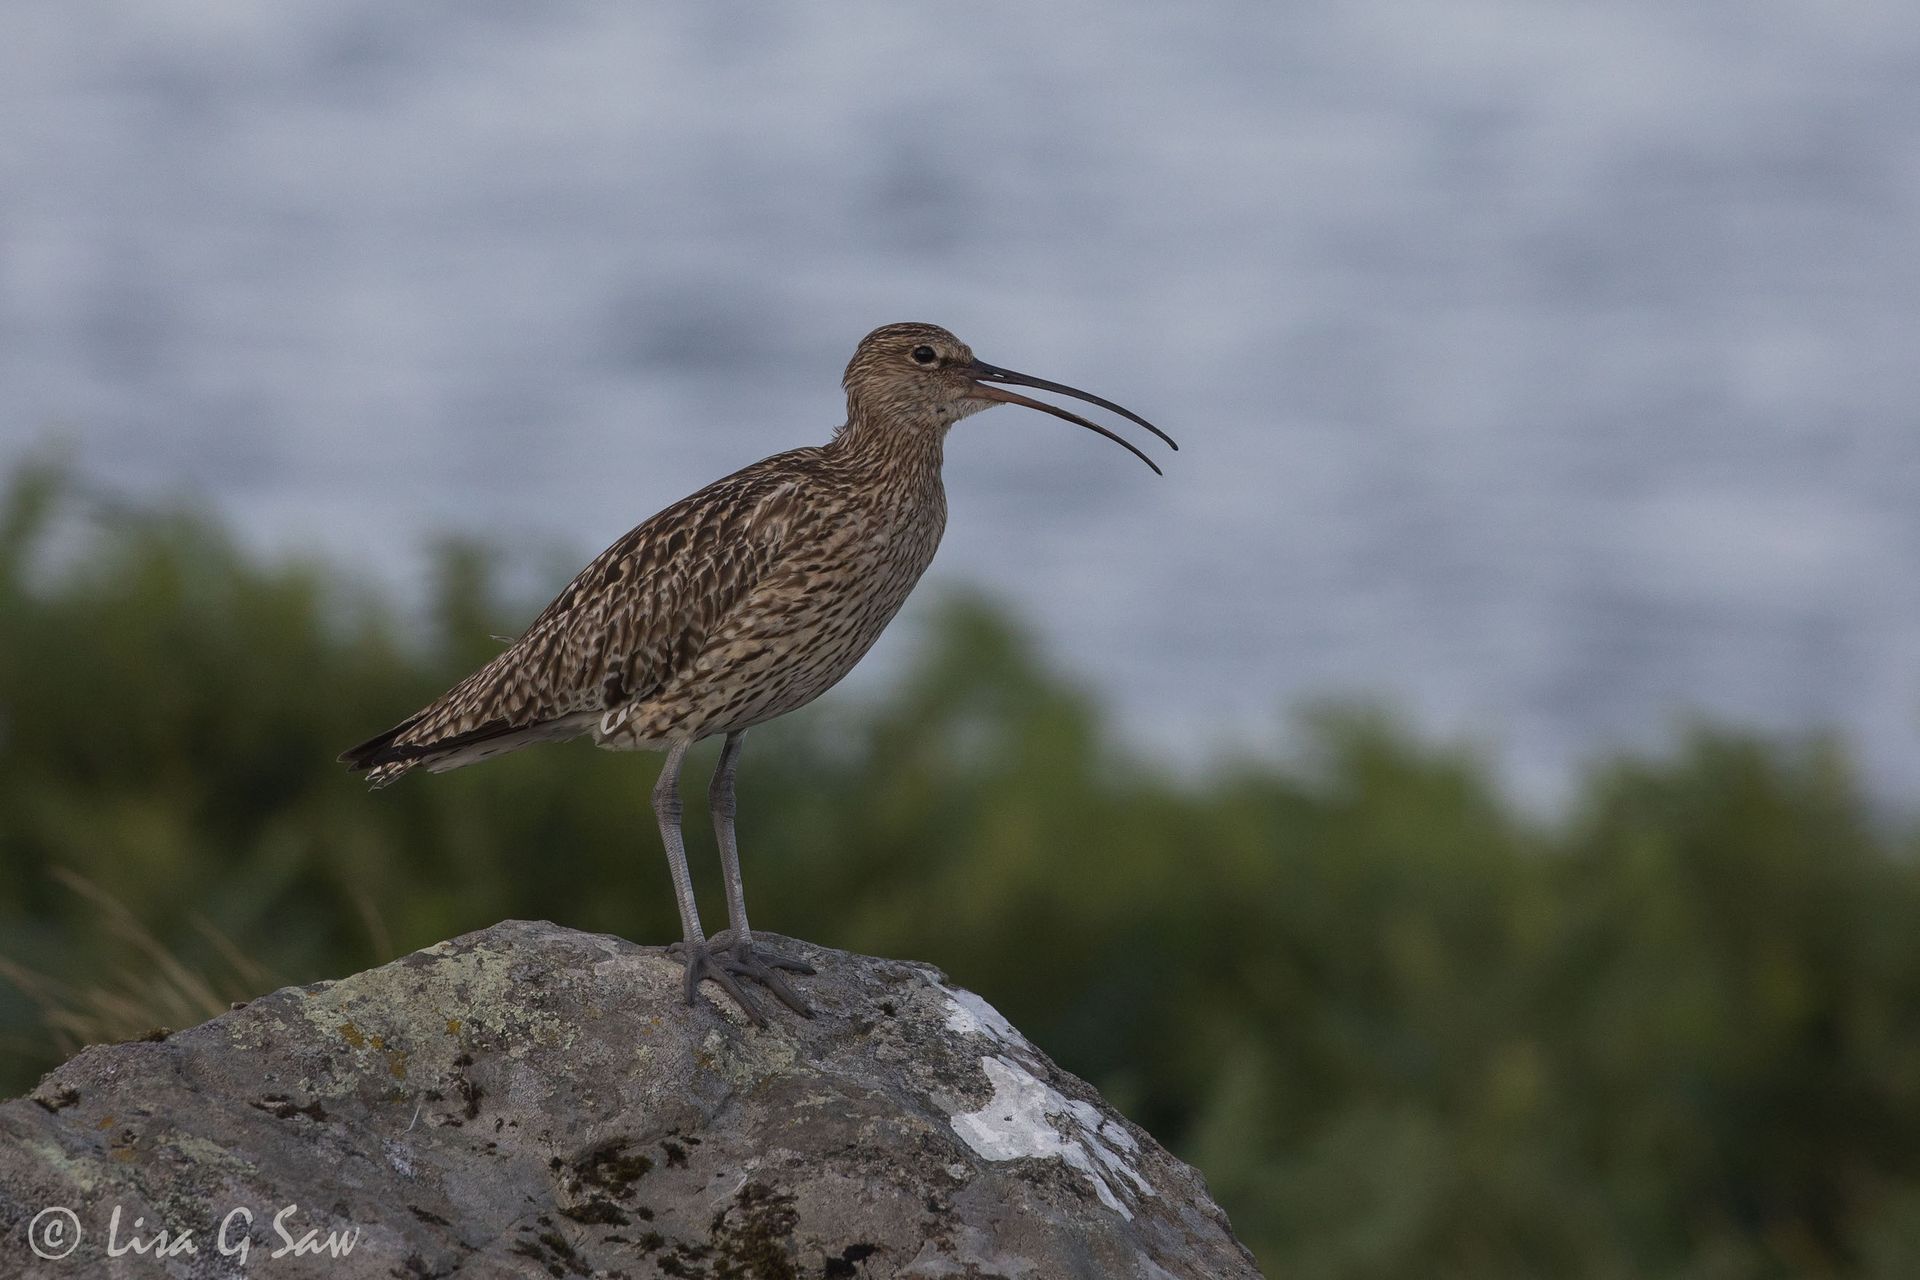 Adult Curlew with beak slightly open on rock